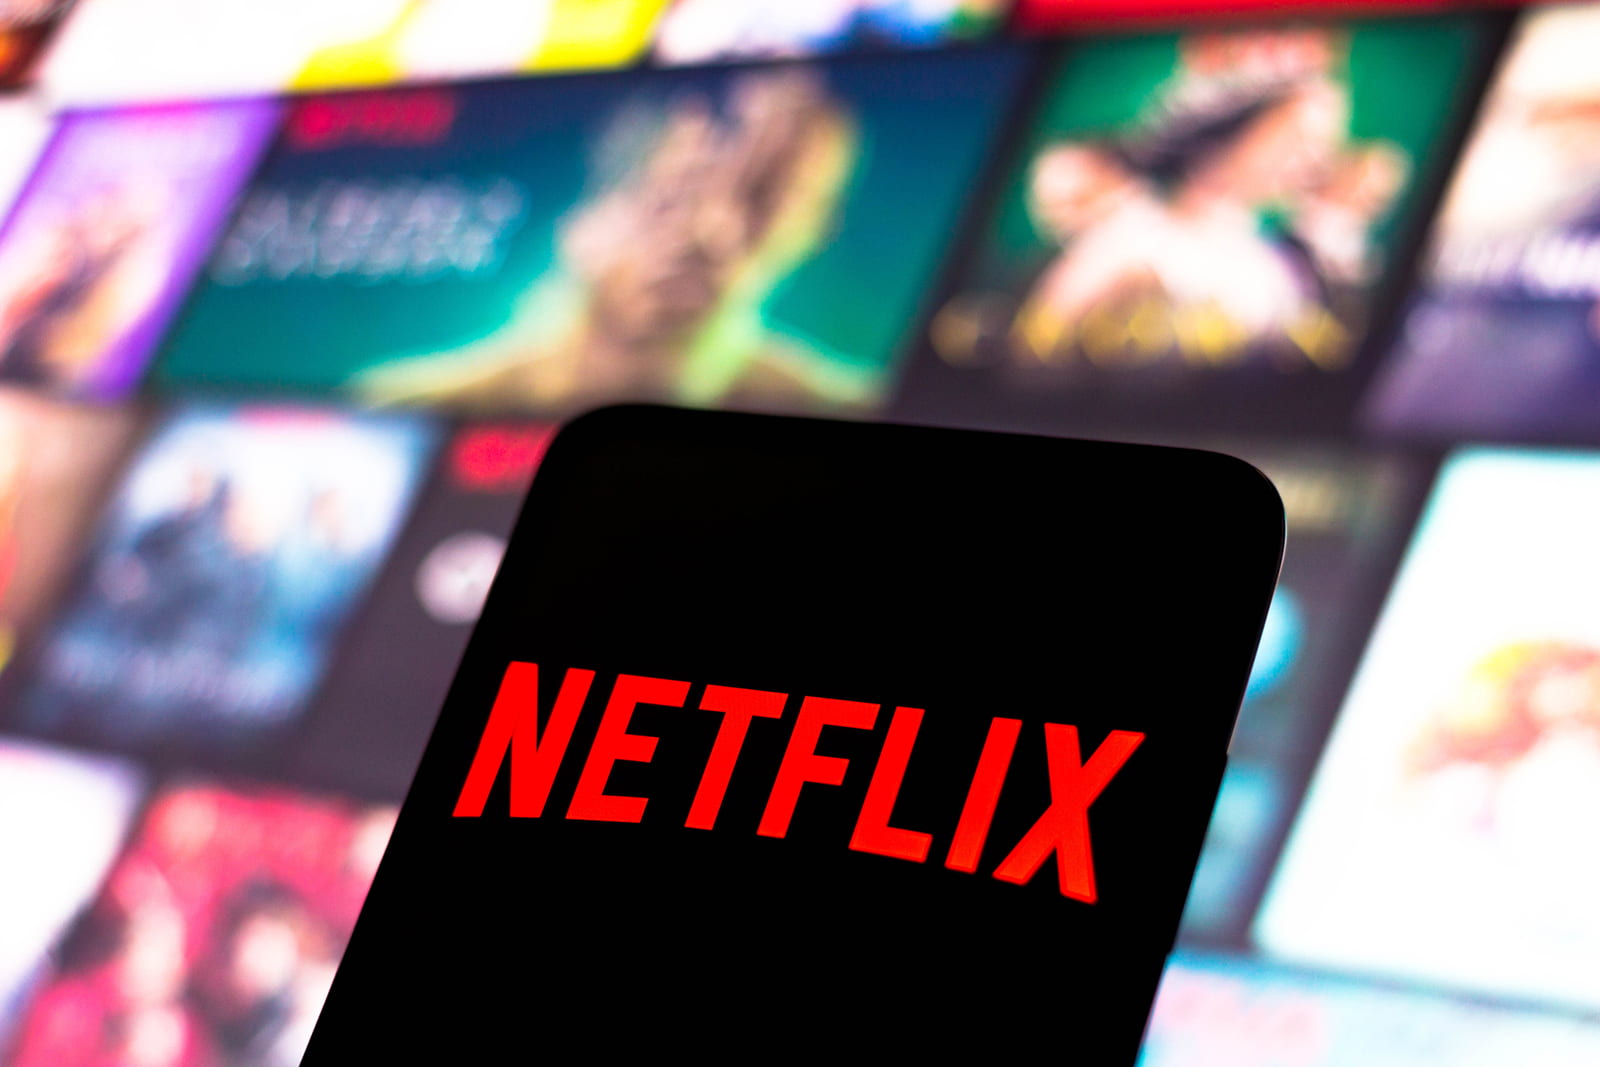 Netflix announced Tuesday that users who share passwords must now pay an additional fee to do so. (Dreamstime/TNS)